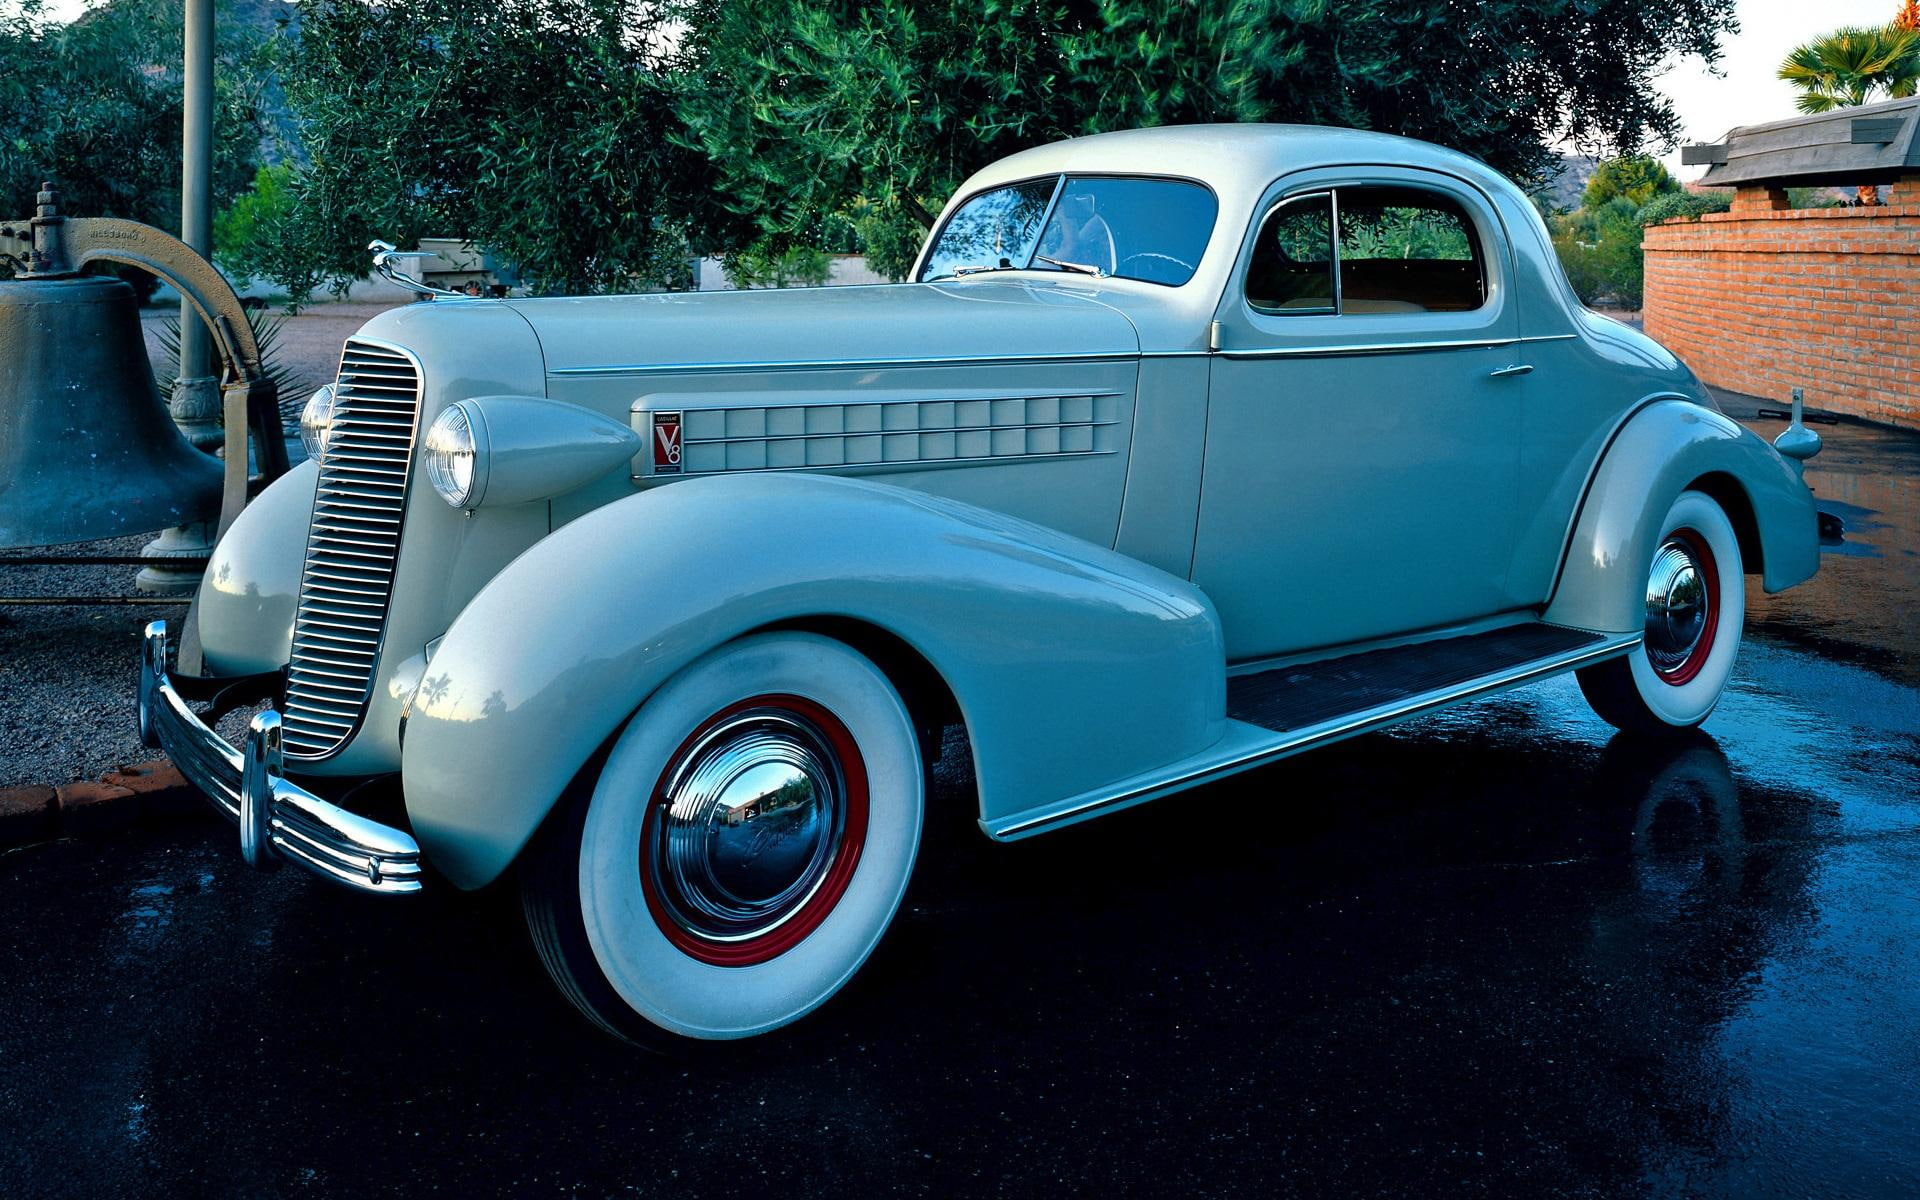 1936 Cadillac Series 70 Coupe, vintage, classic, caddy, antique